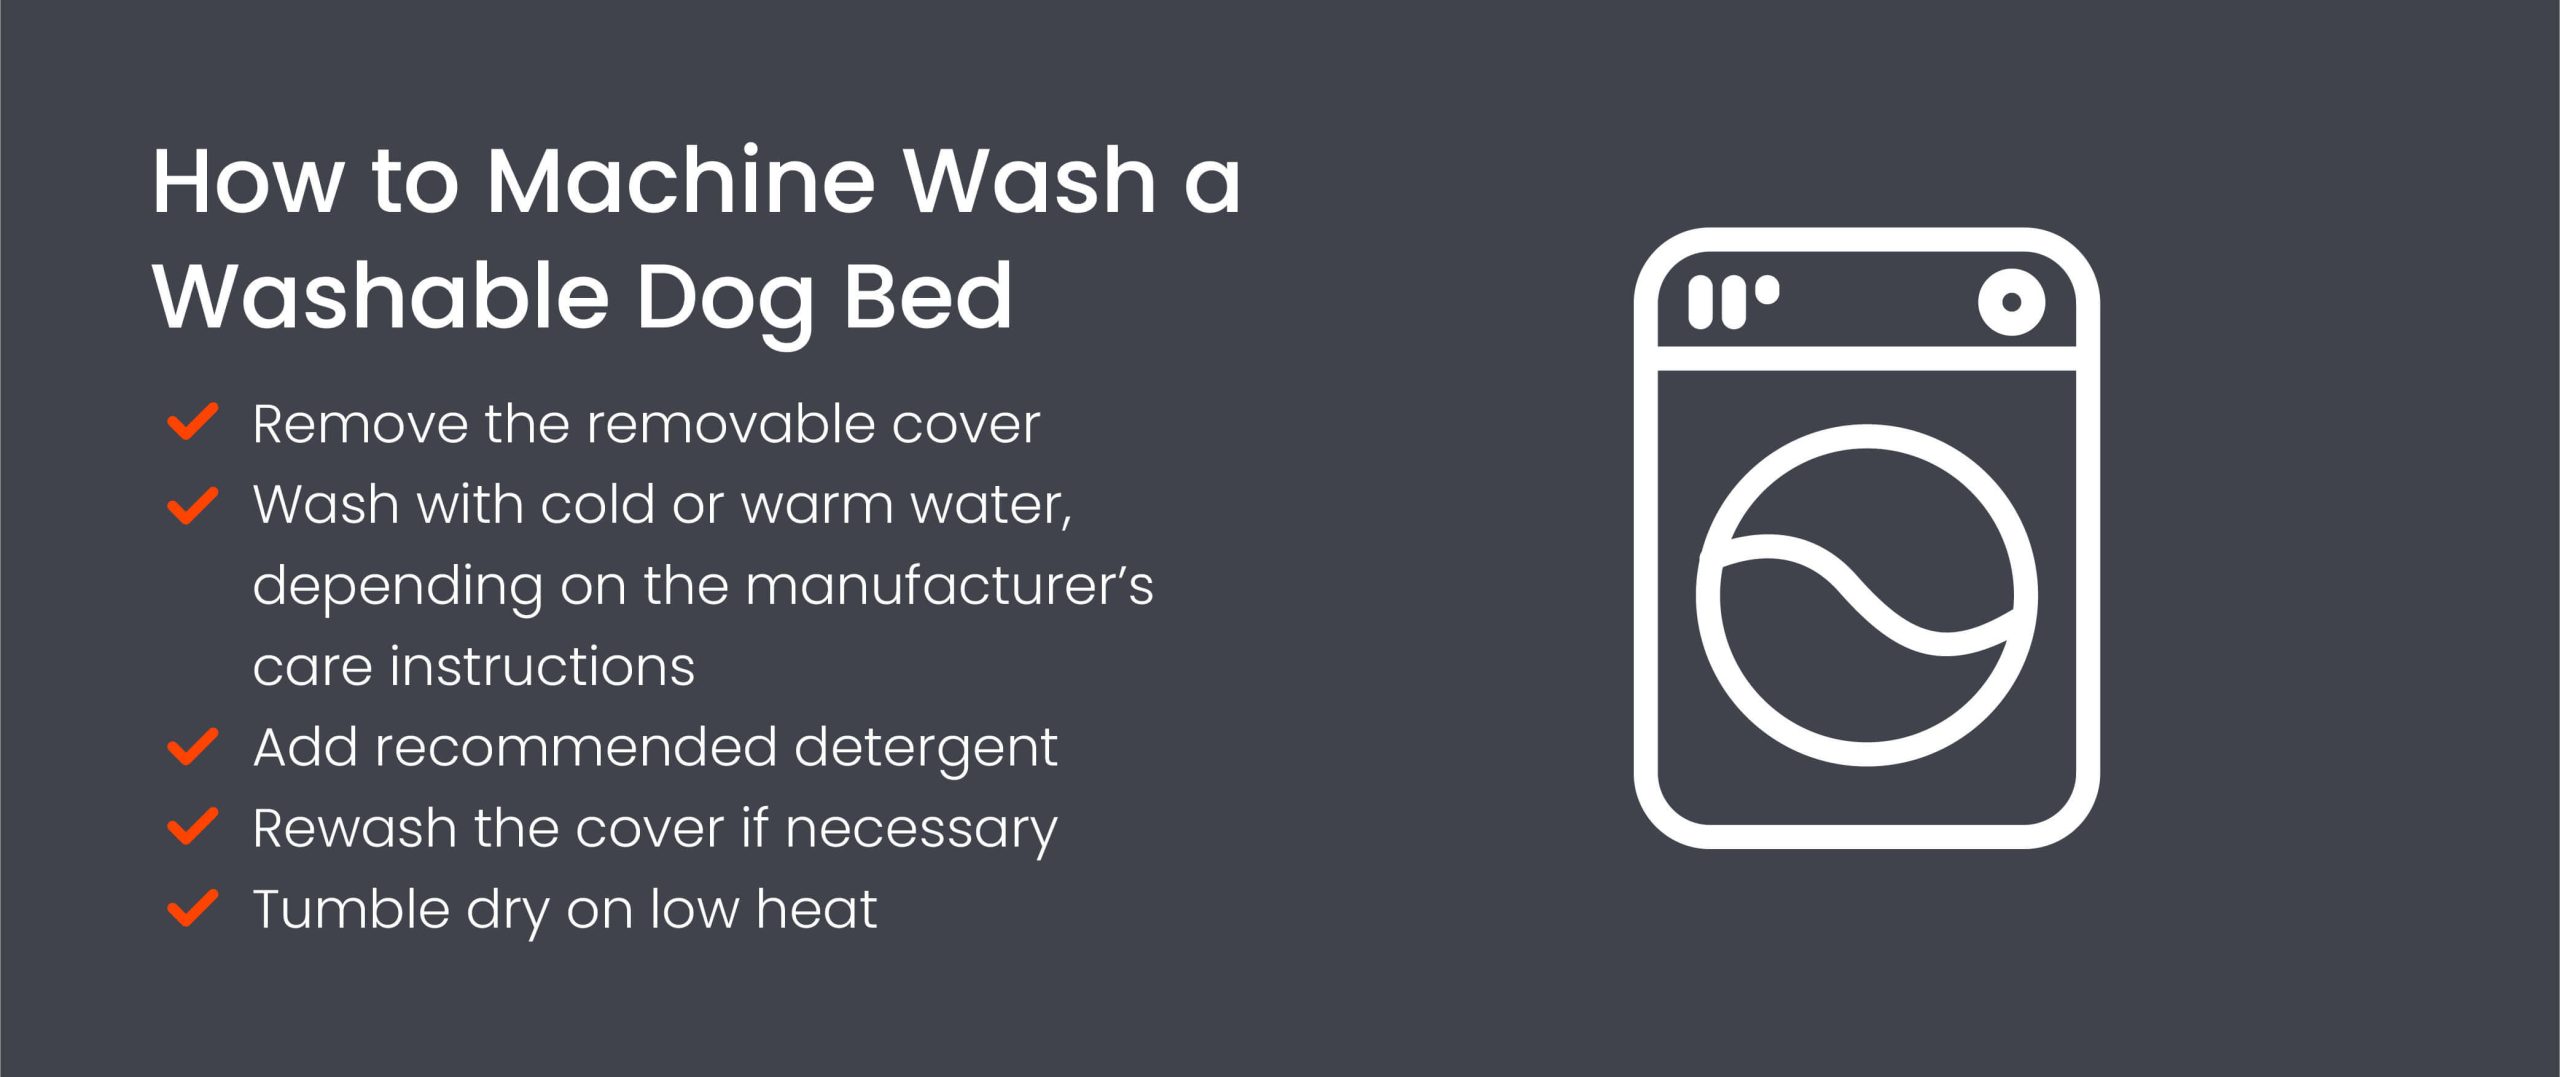 How to machine wash a washable dog bed